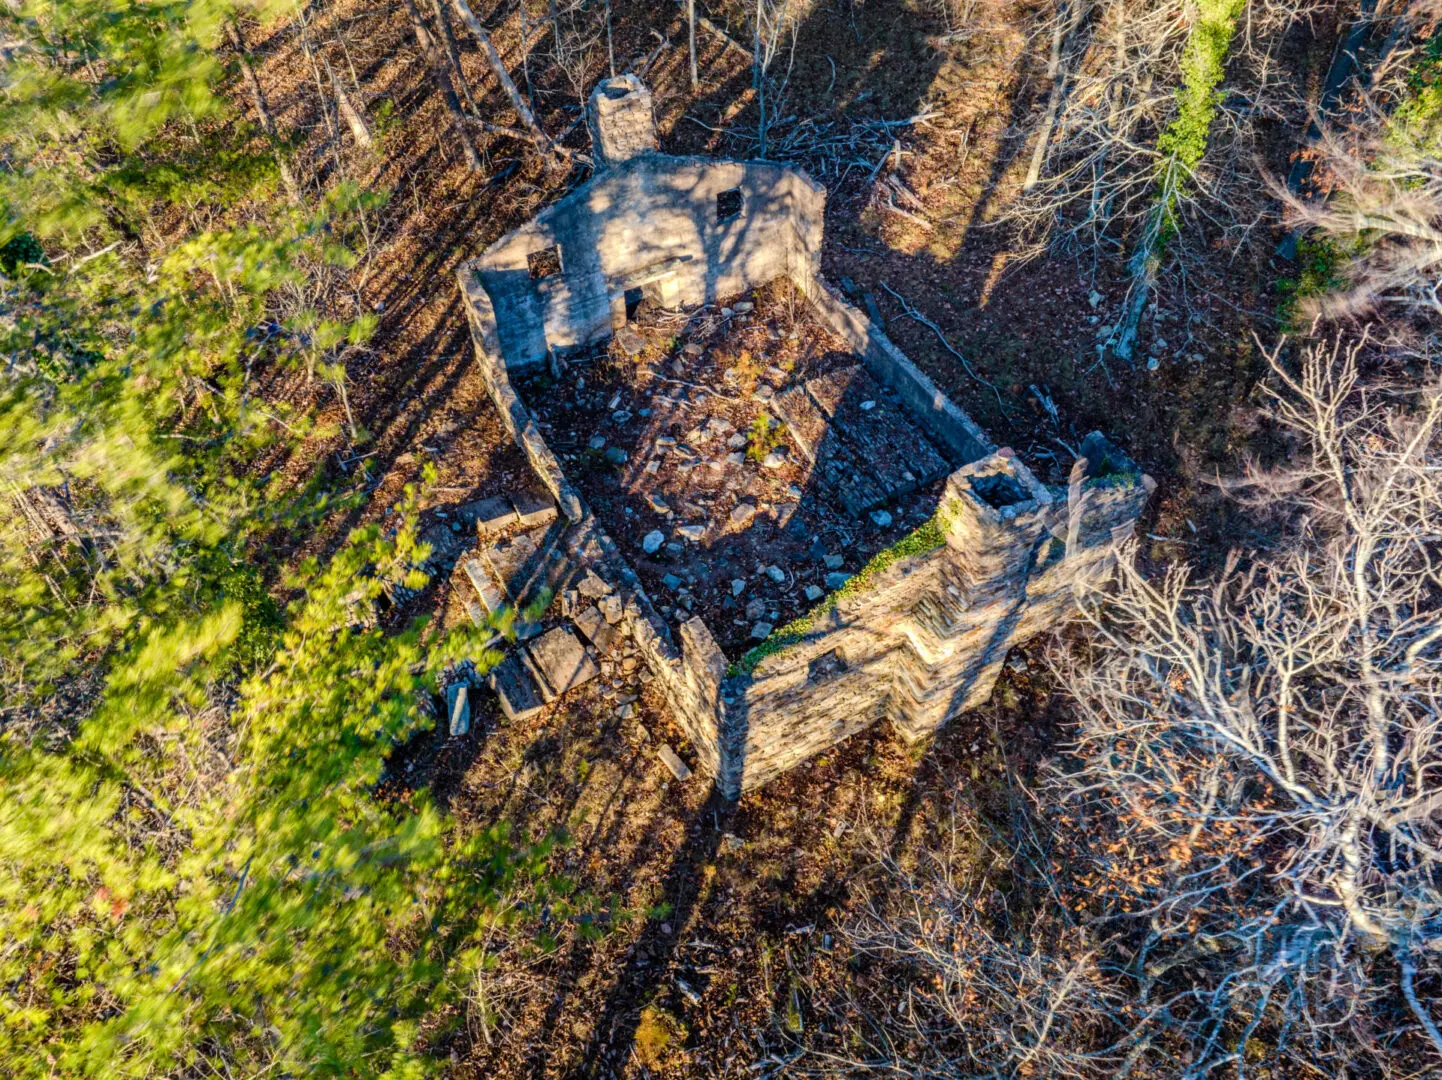 An old building in the woods, seen from an aerial perspective on a vacation.